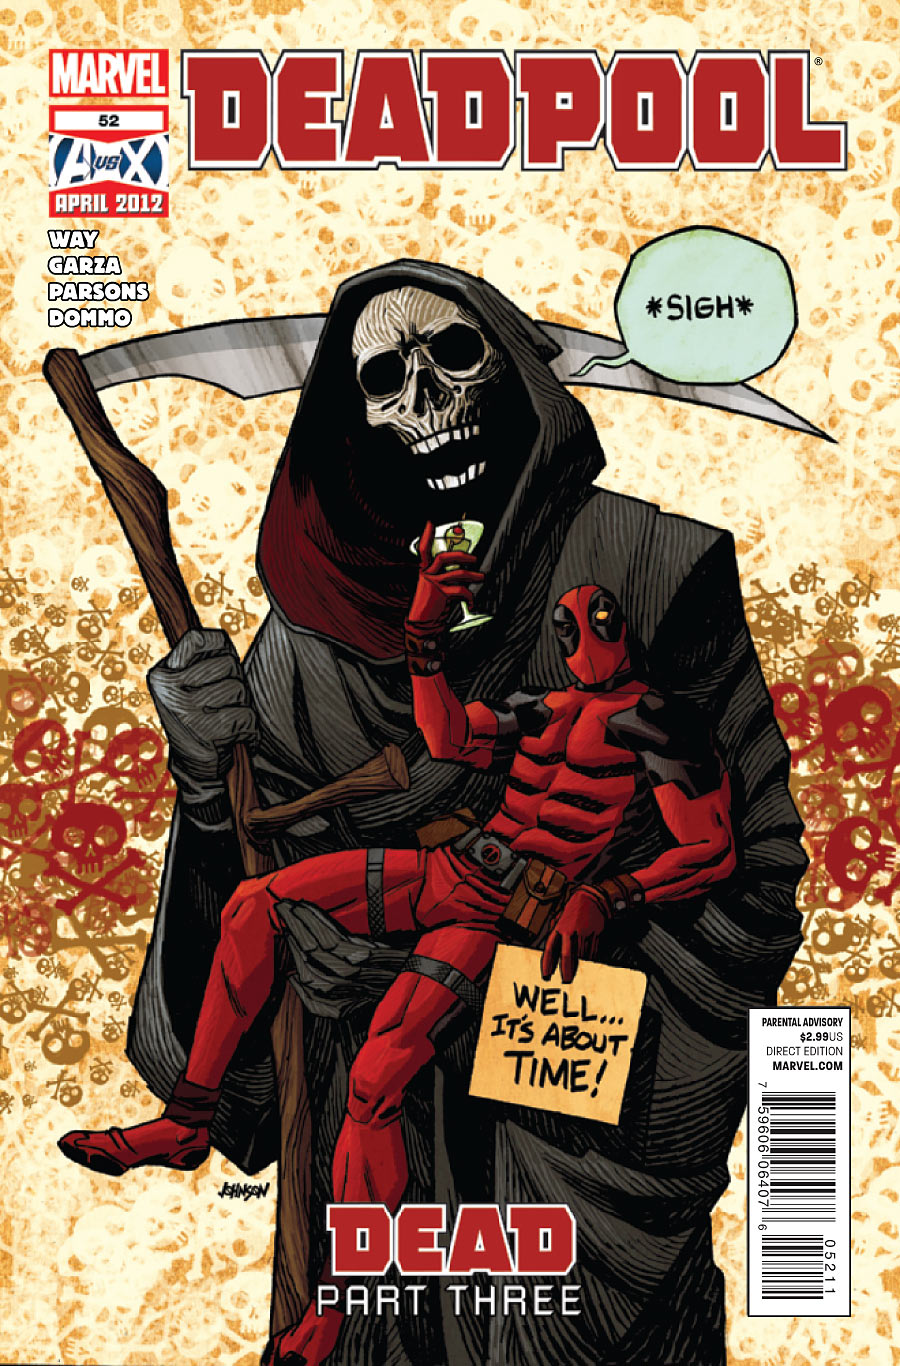 Lido Shuffle: Cover Story - Top 15 Deadpool Covers